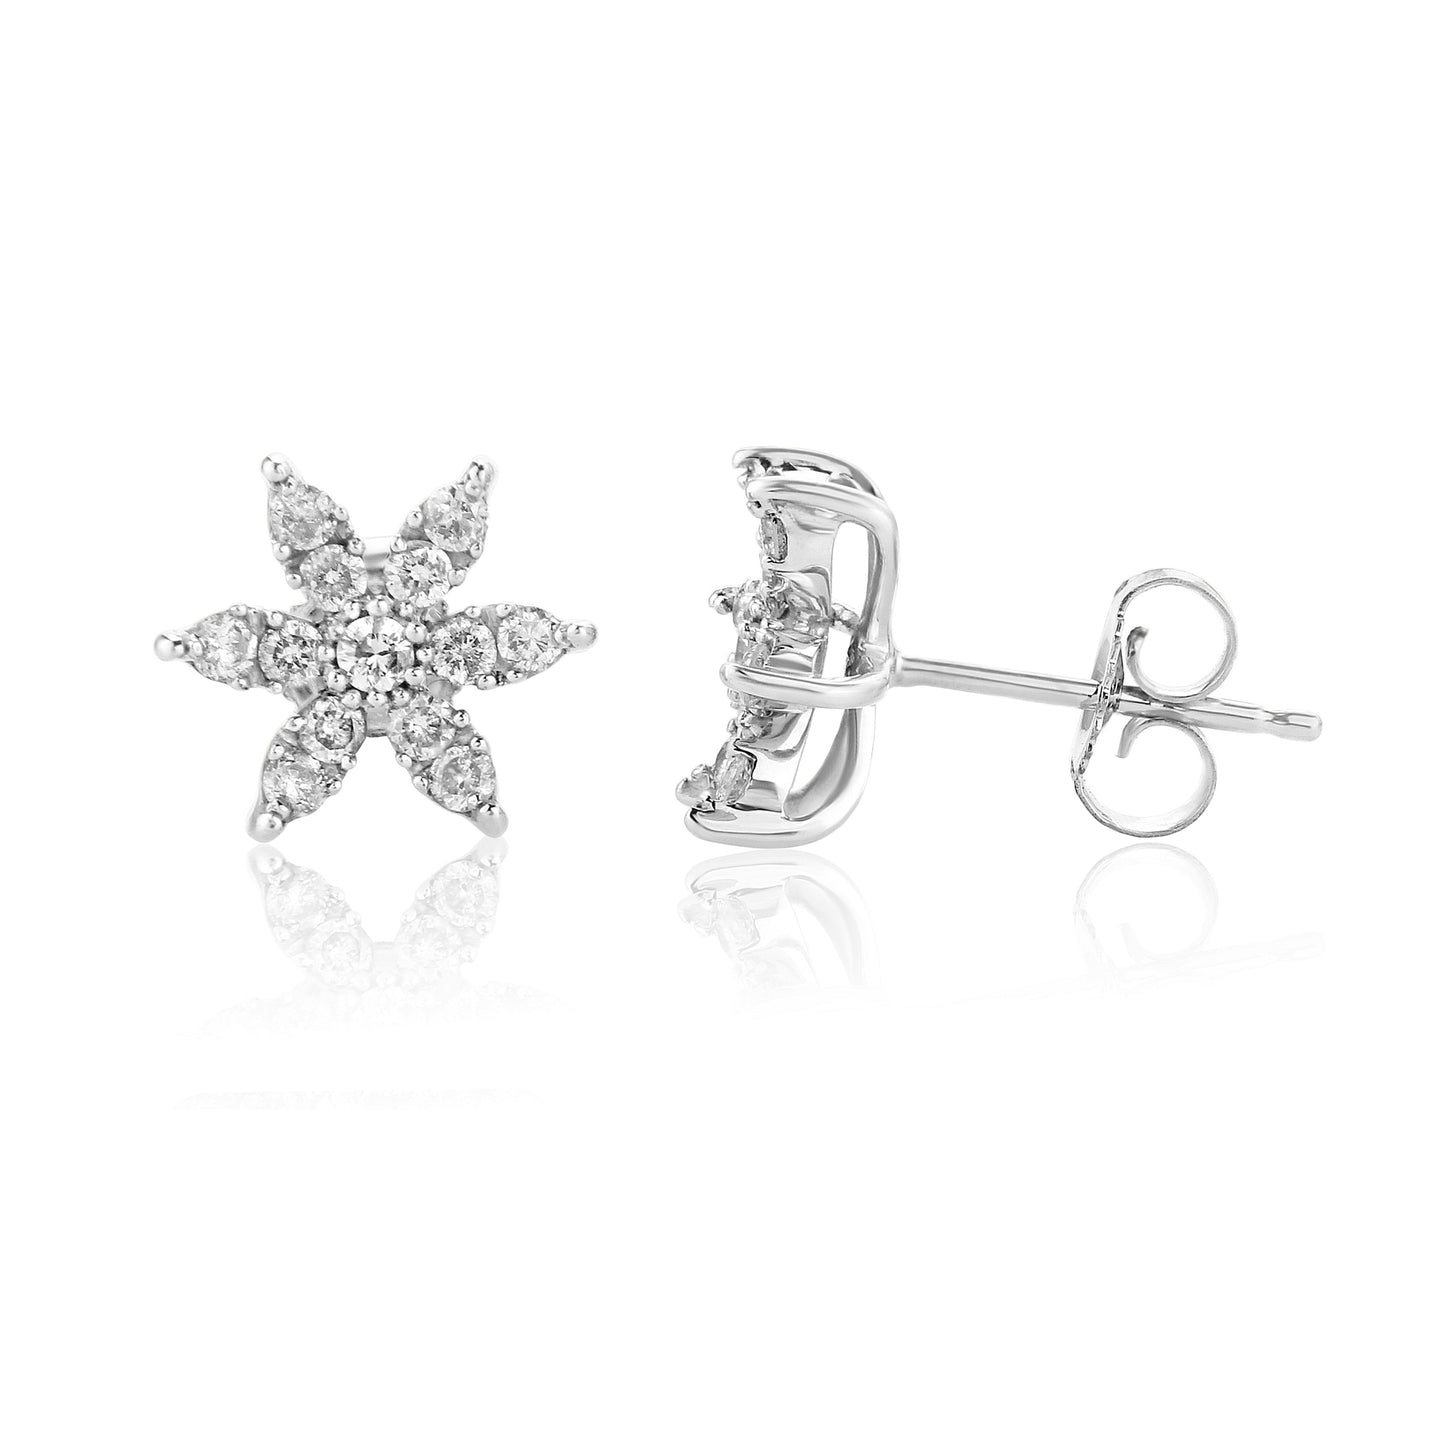 9ct White Gold Floral Diamond Earrings